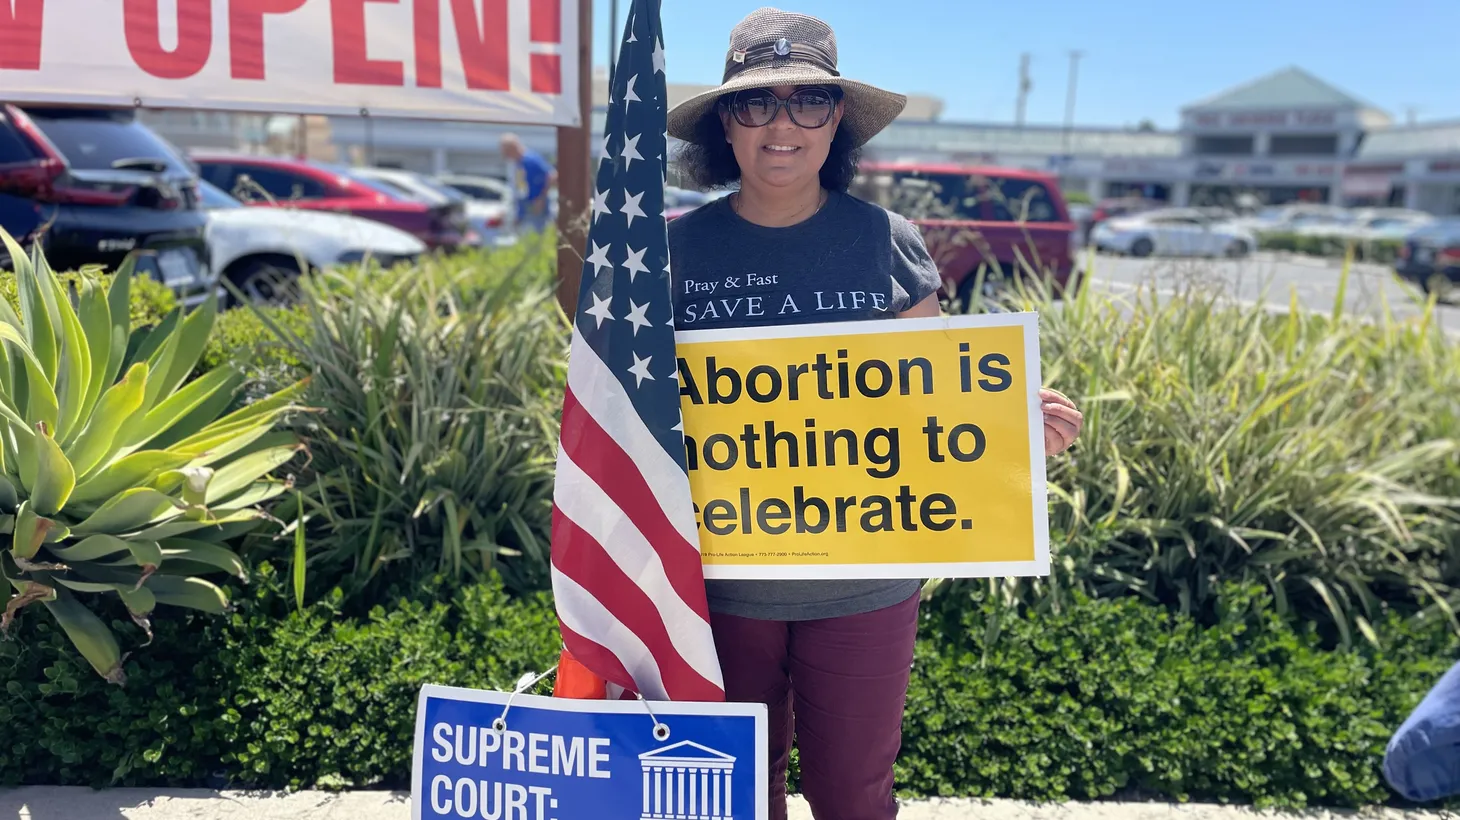 Glendy Perez of Hacienda Heights celebrates the end of Roe v. Wade outside an El Monte shopping center where there is a Planned Parenthood. She’s been coming to this location since 2017 with other pro-life advocates.